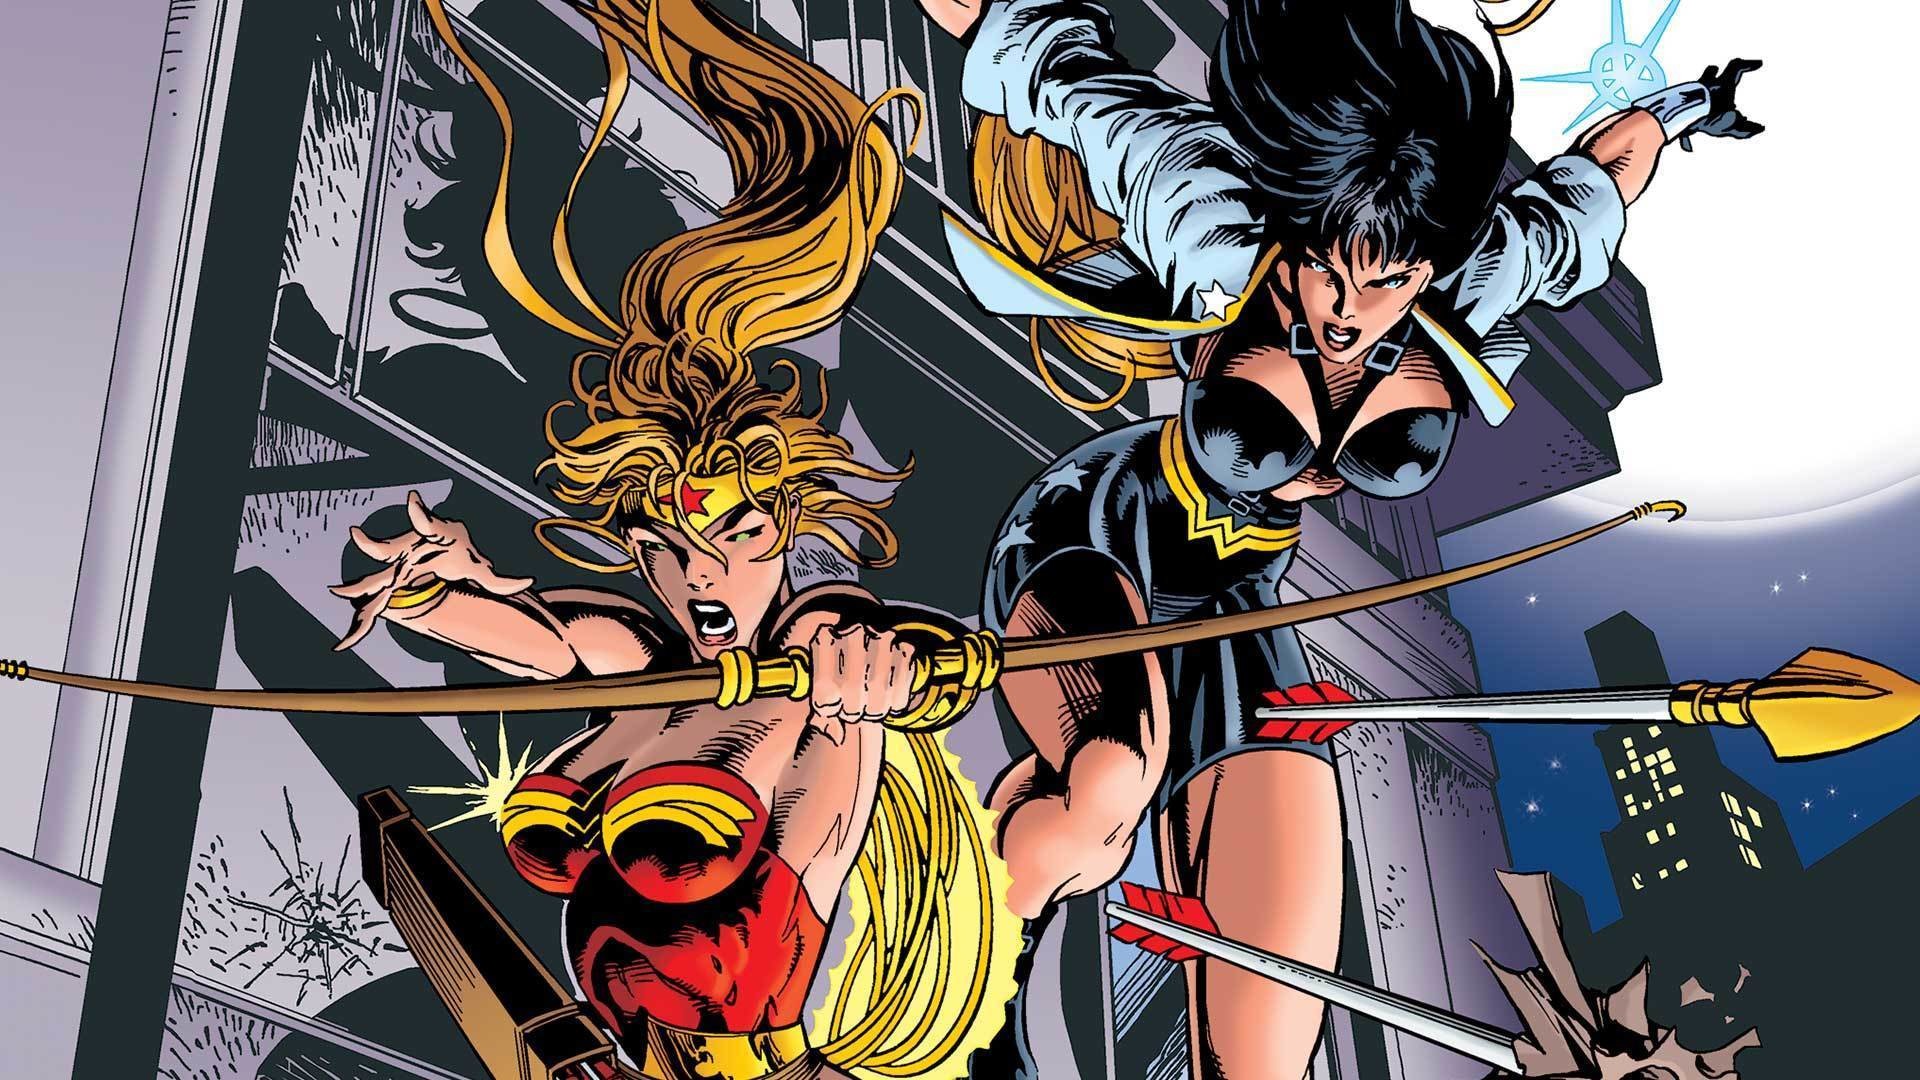 1920x1080 DC again tried a drastic overhaul of the Wonder Woman franchise in the mid  '90s when sales began to plummet. Diana wound up temporarily losing the  Wonder ...